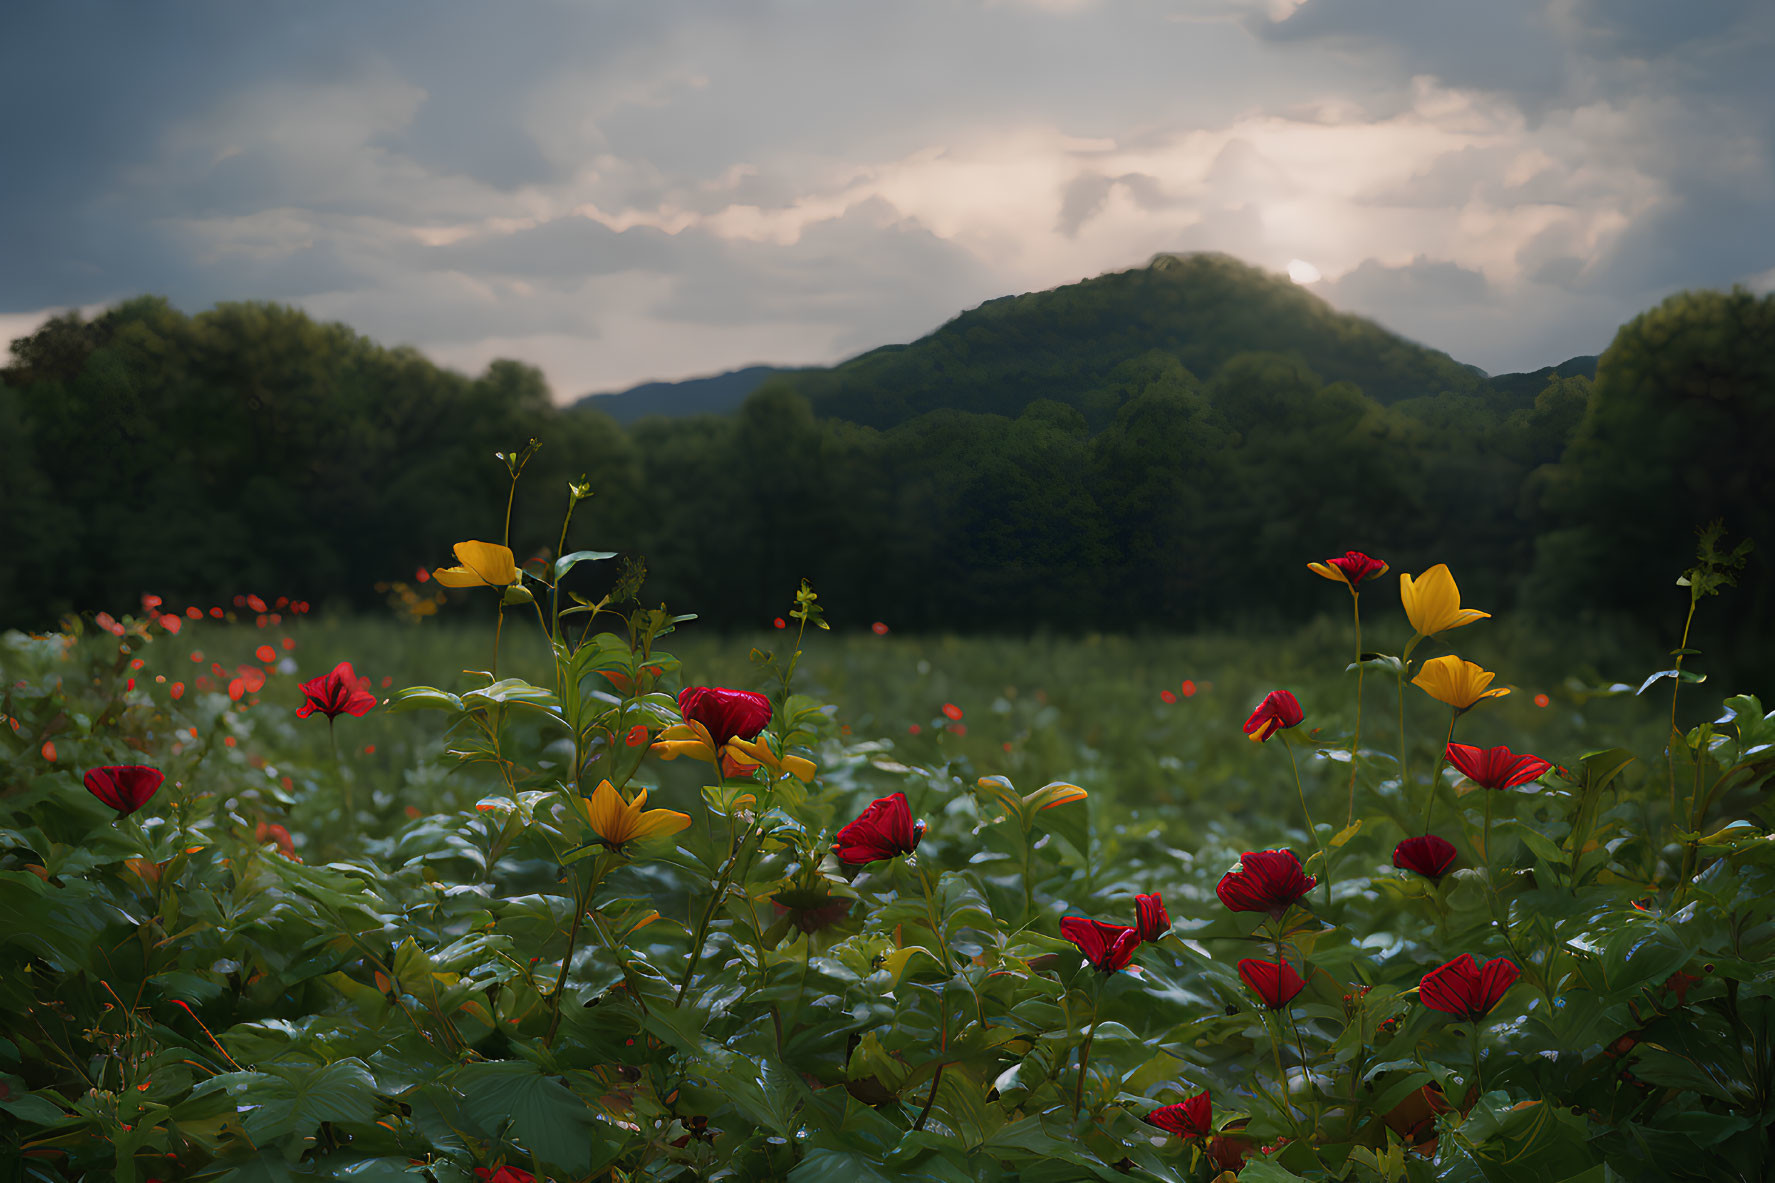 Vibrant red and yellow flower field under dramatic sky with sunbeams over forested mountain